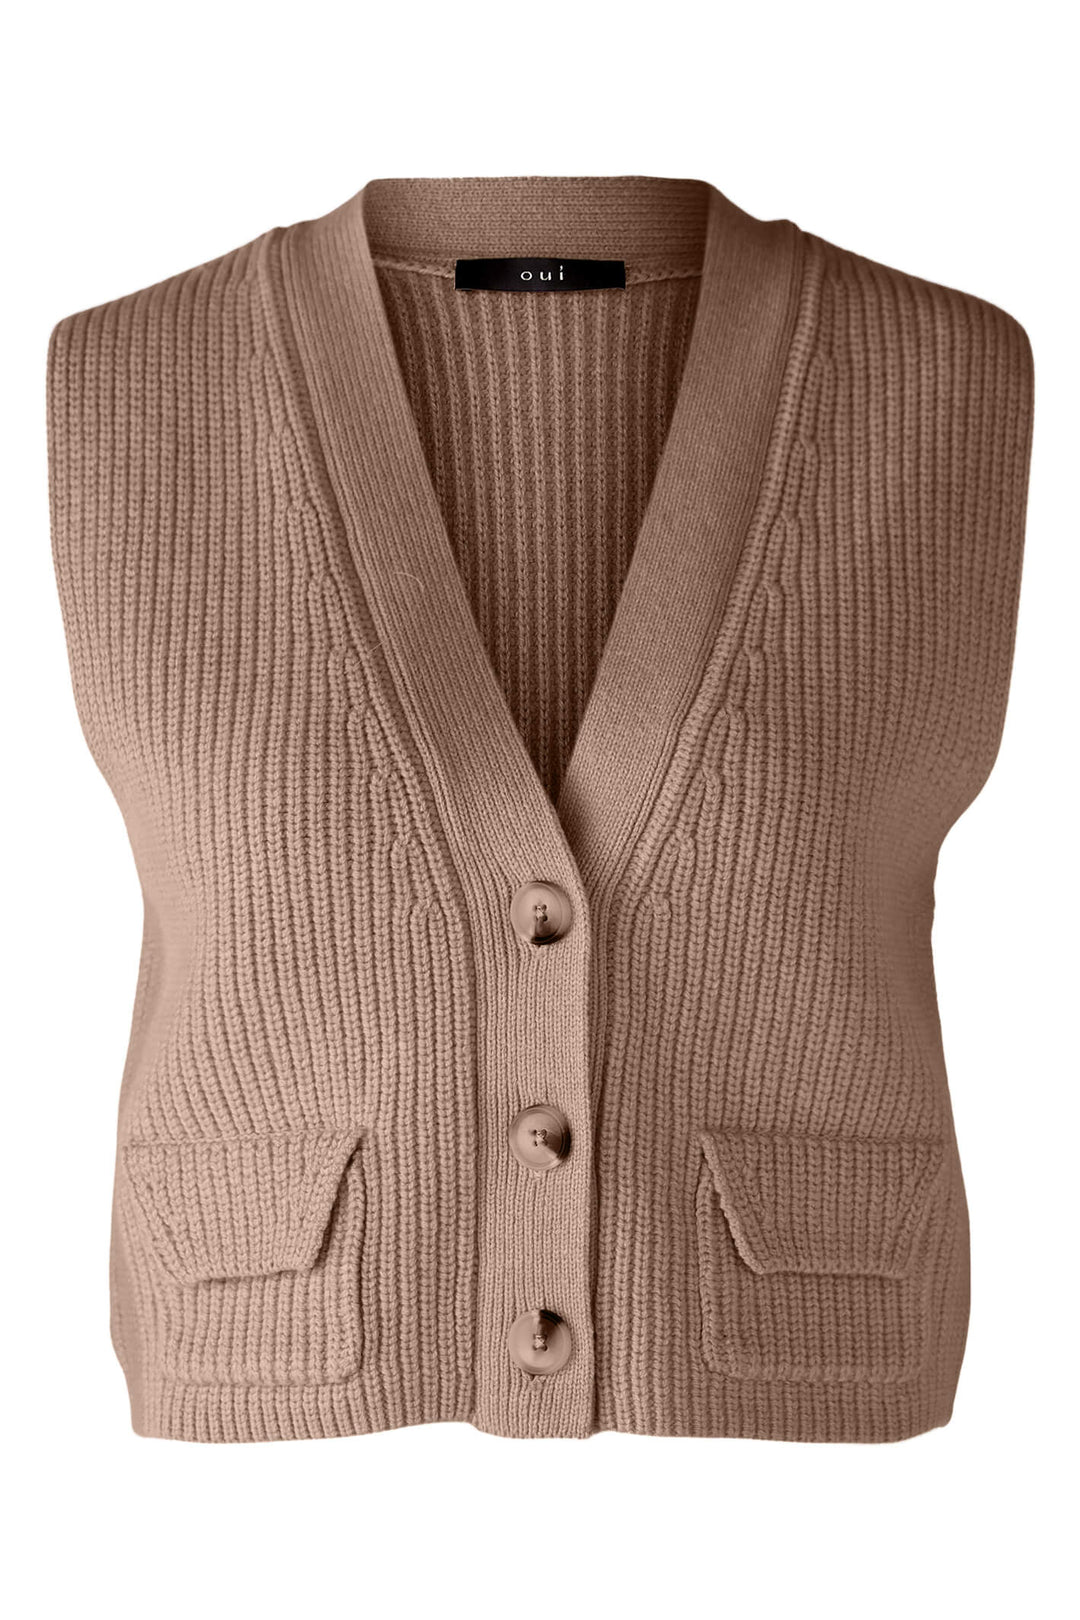 Oui 80082 8101 Taupe Melange Three Button Knitted Waistcoat - Shirley Allum Boutique